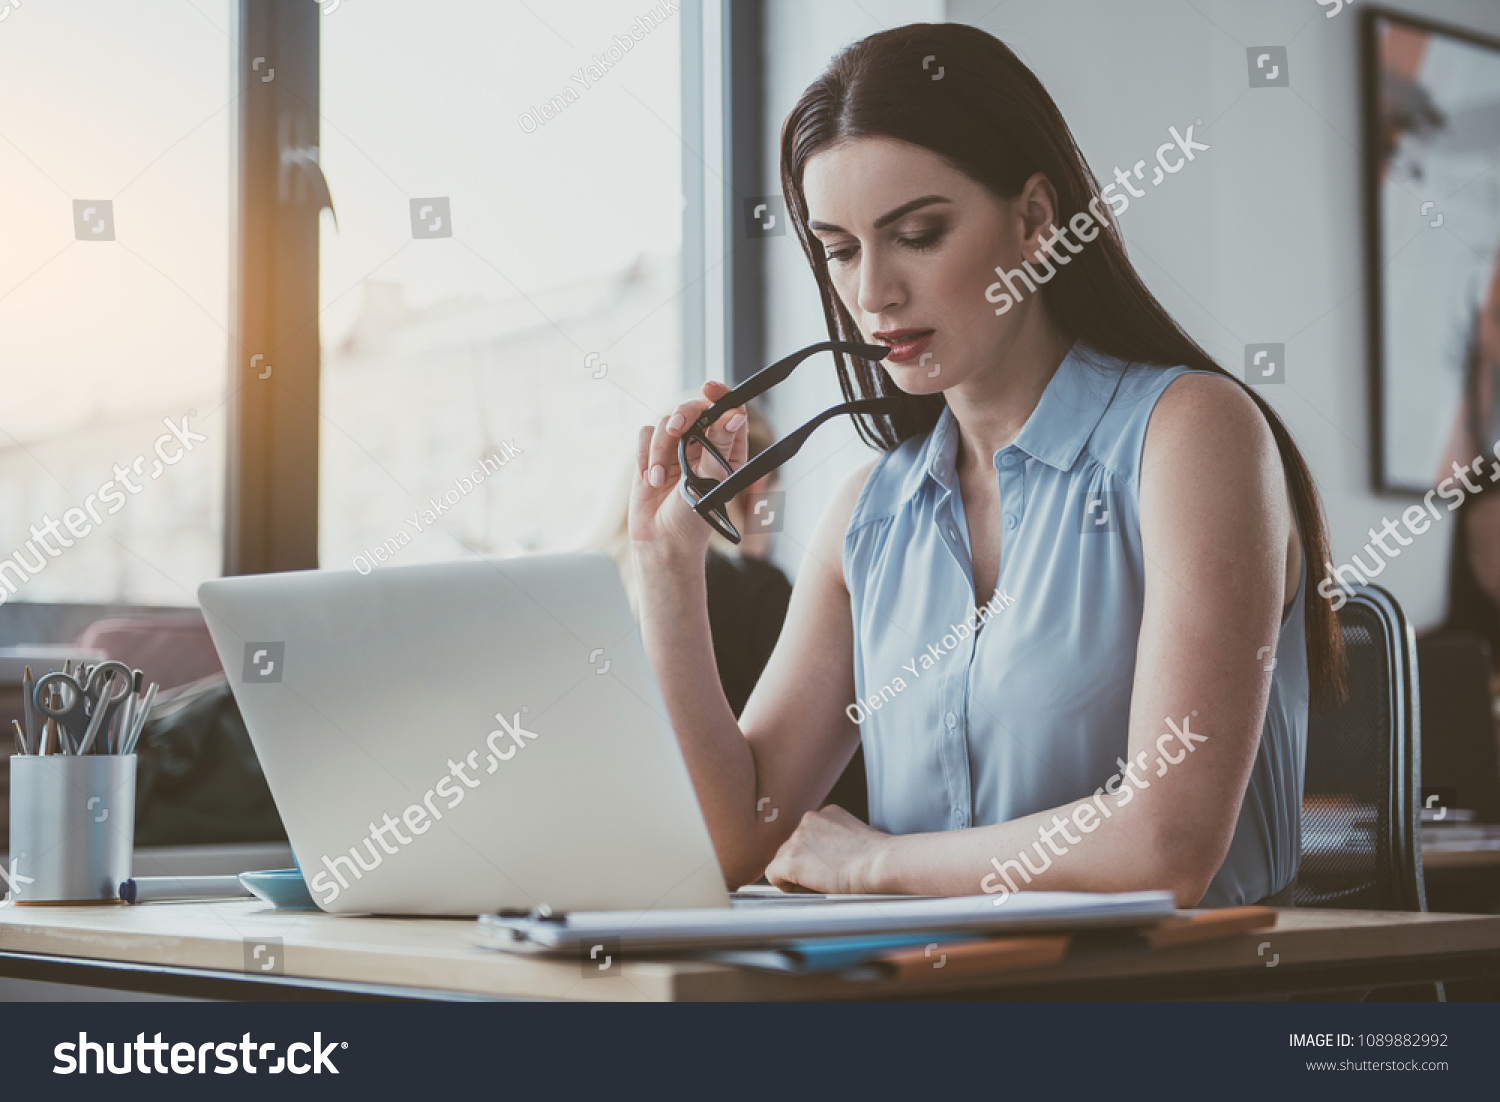 Portrait of pensive businesswoman looking at digital device while sitting at table. Wistful employer at job concept #1089882992